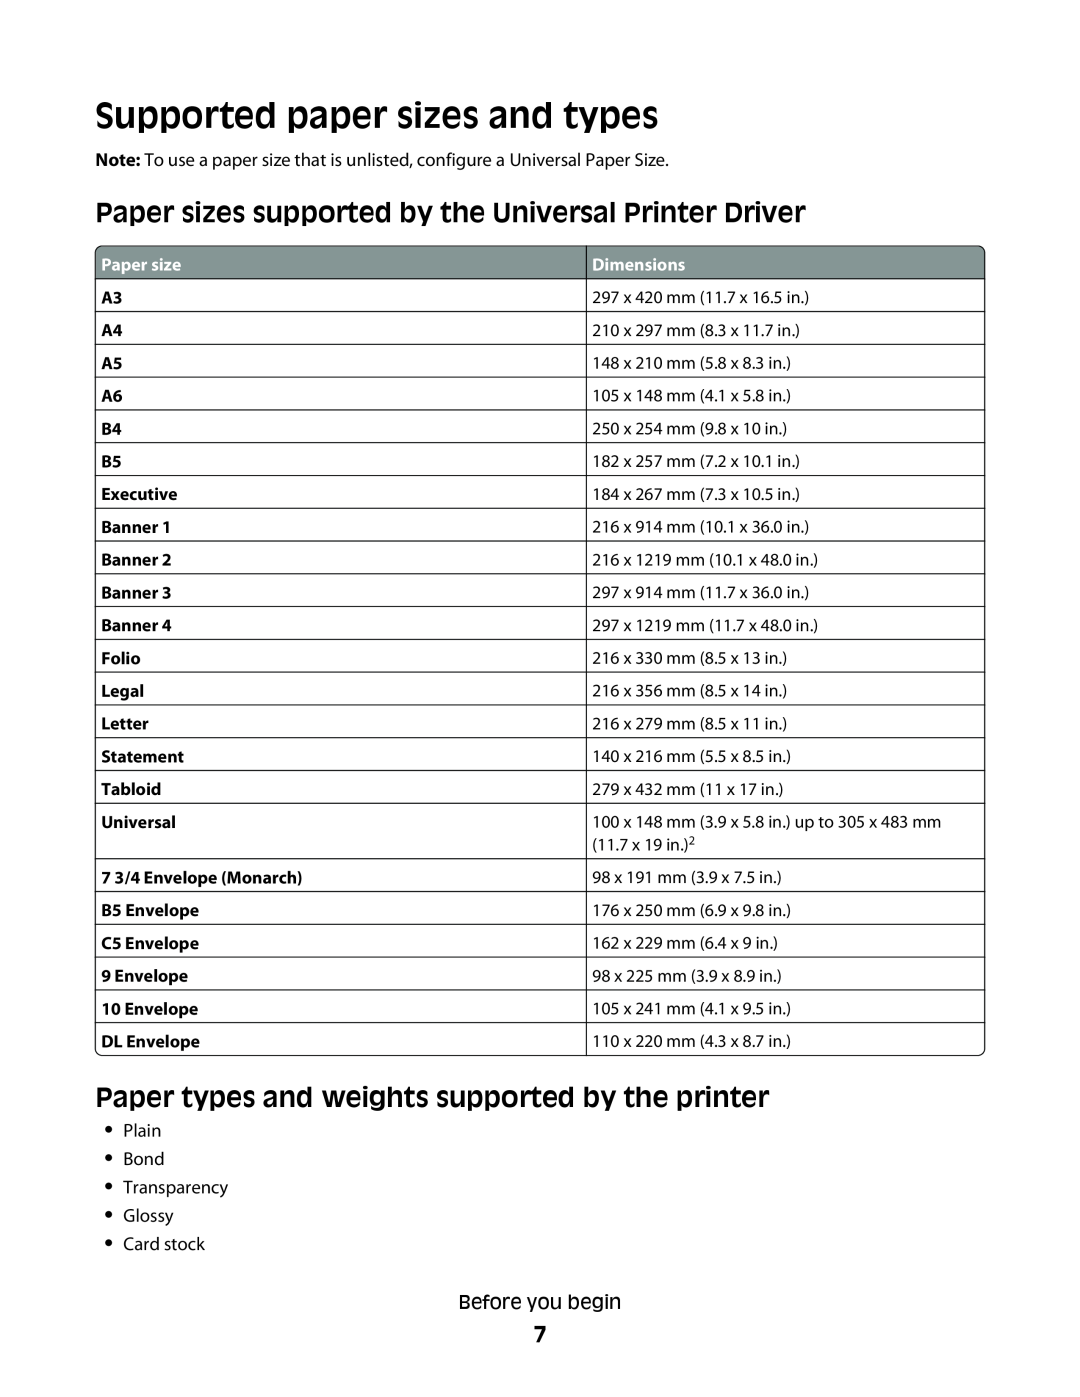 Lexmark Universal Driver manual Supported paper sizes and types, Paper sizes supported by the Universal Printer Driver 